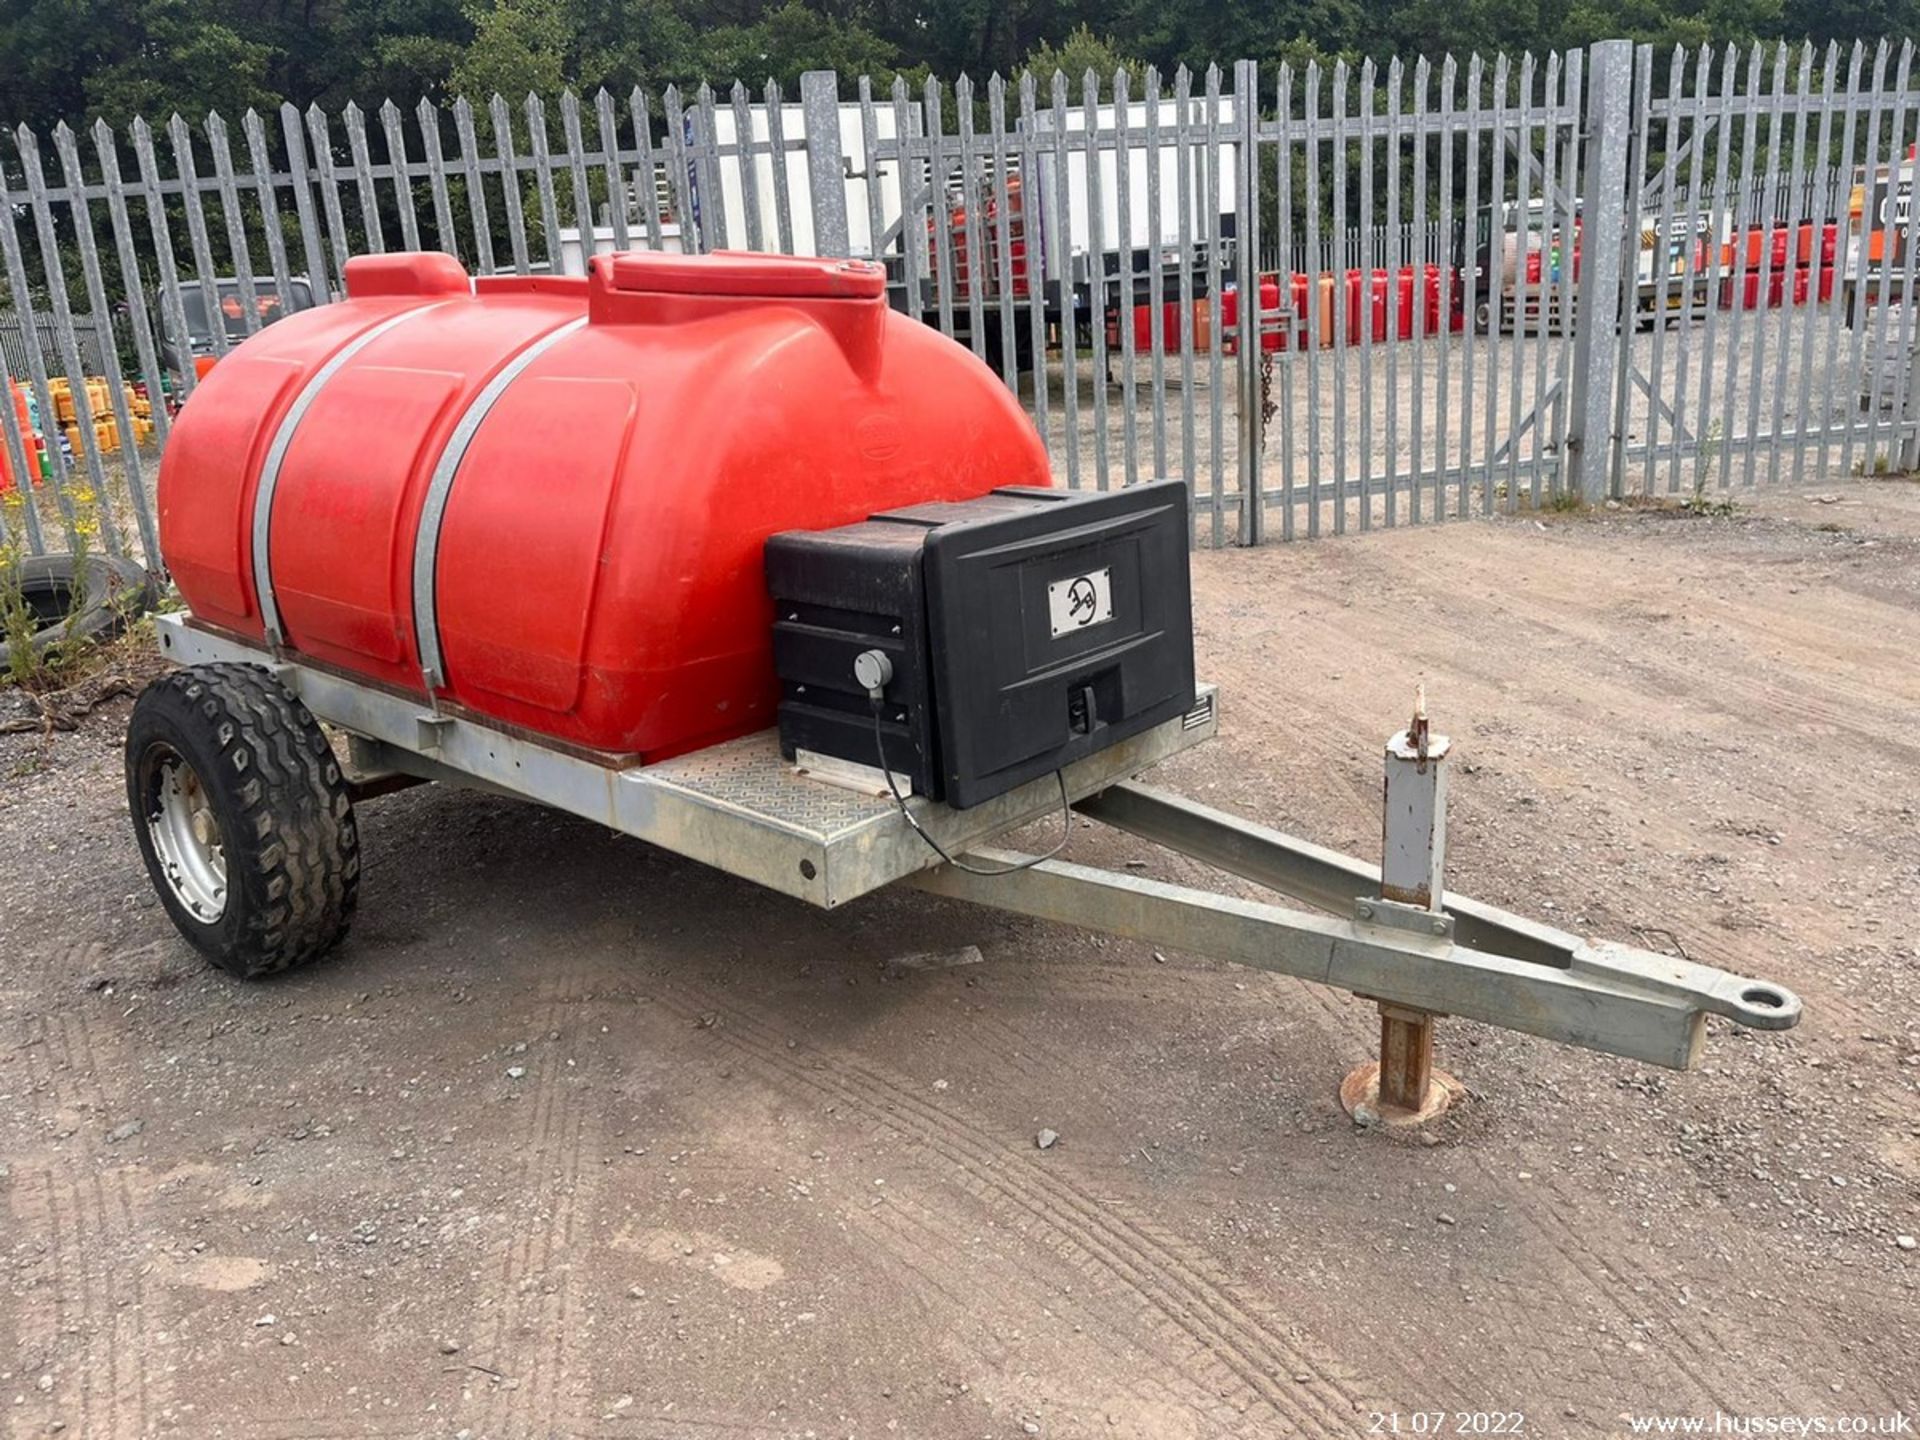 WESTERN WATER BOWSER 500 GALLON. SITE TOW. ELECTRIC TRANSFER PUMP ON FRONT